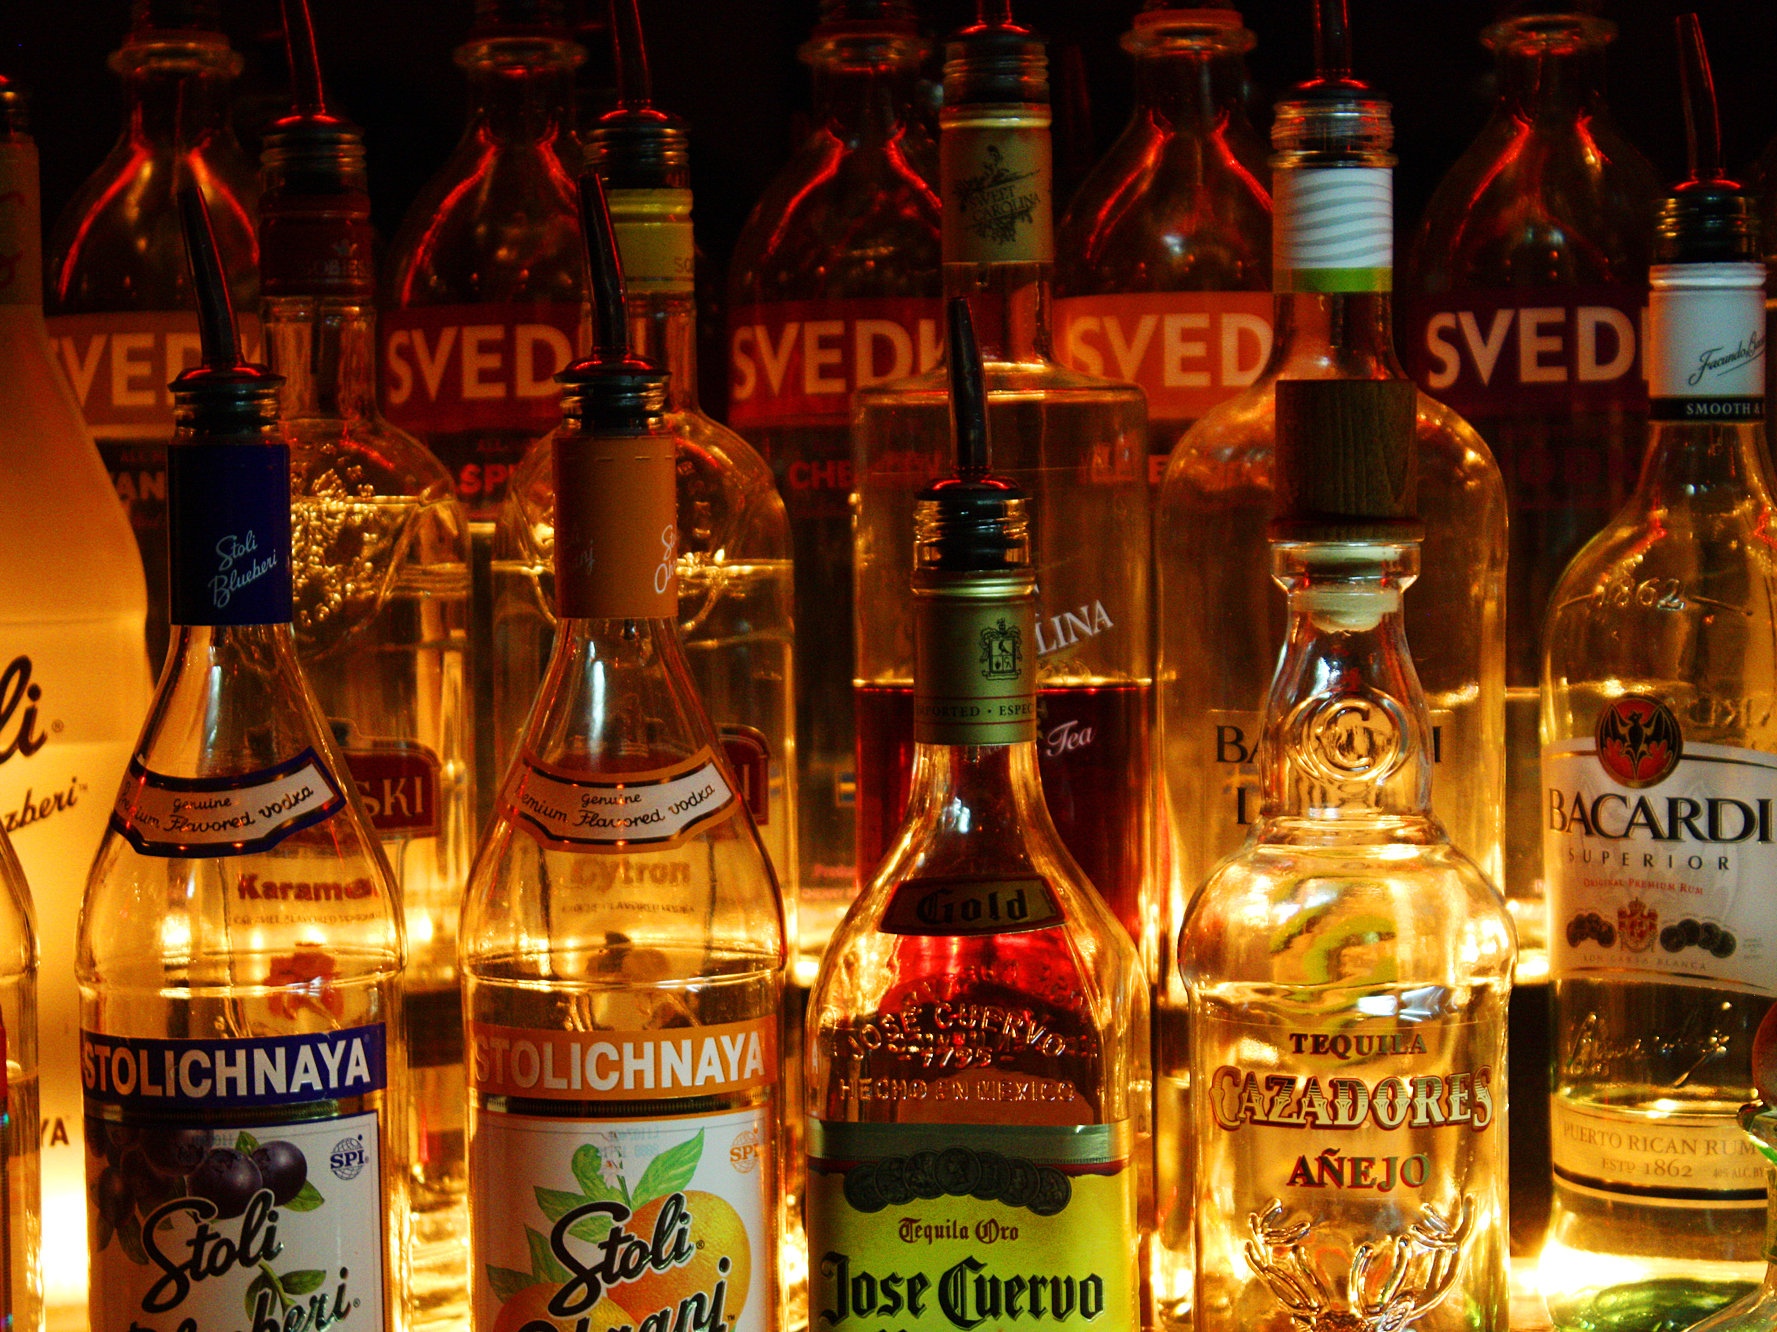 One in six adults binge drink, and that plays a role in most alcohol-related deaths. Photo: Intangible Arts/Flickr